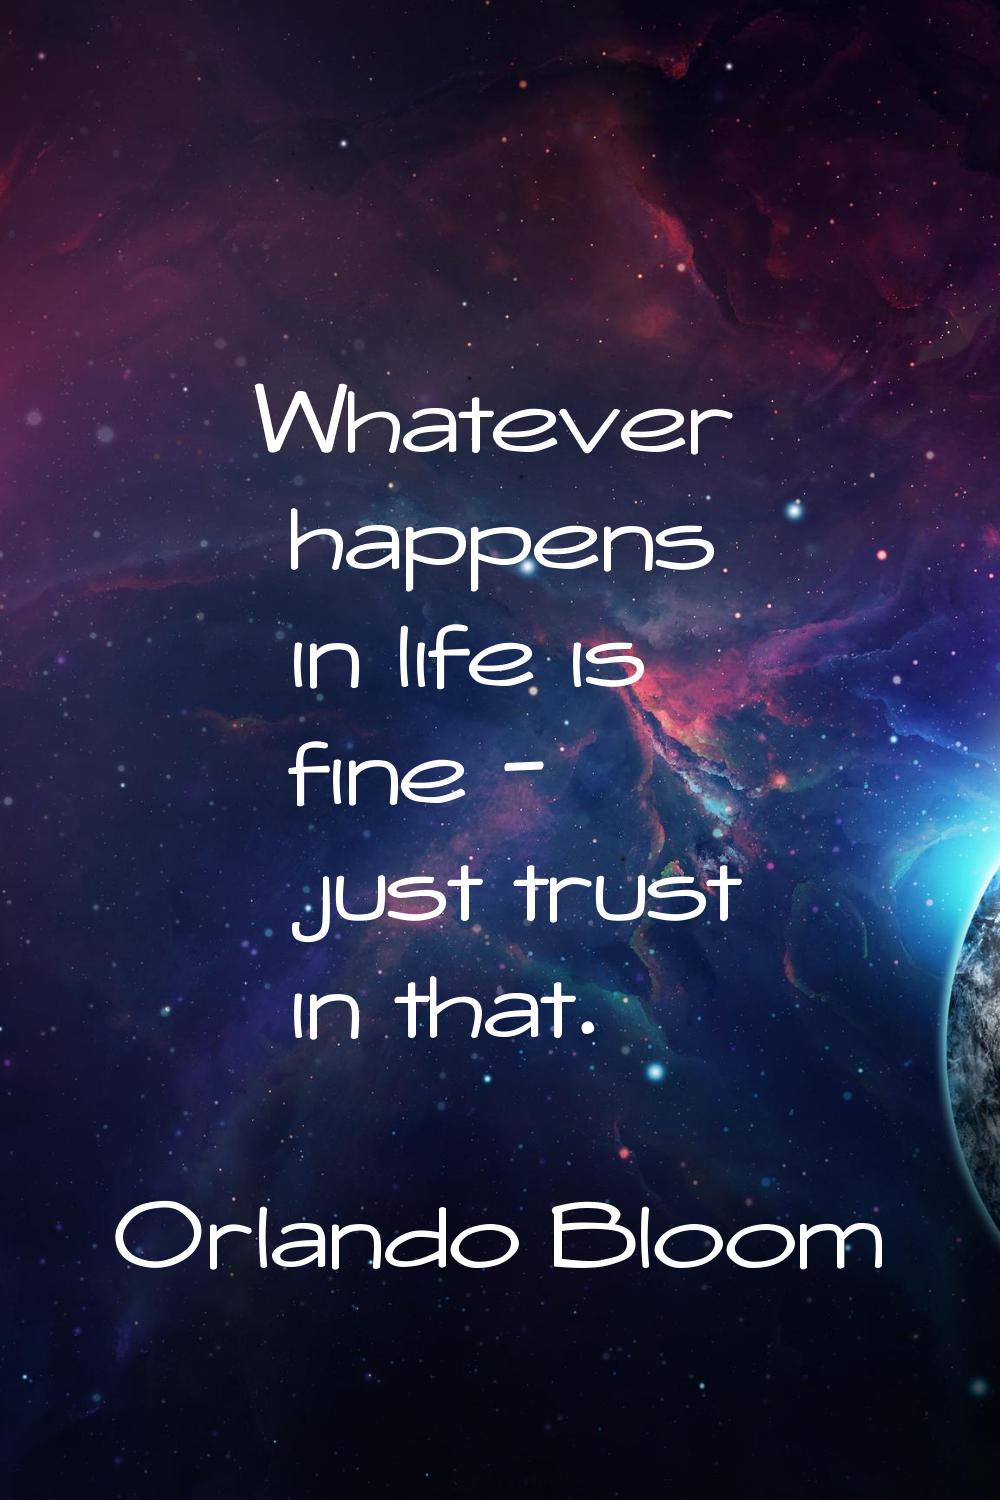 Whatever happens in life is fine - just trust in that.